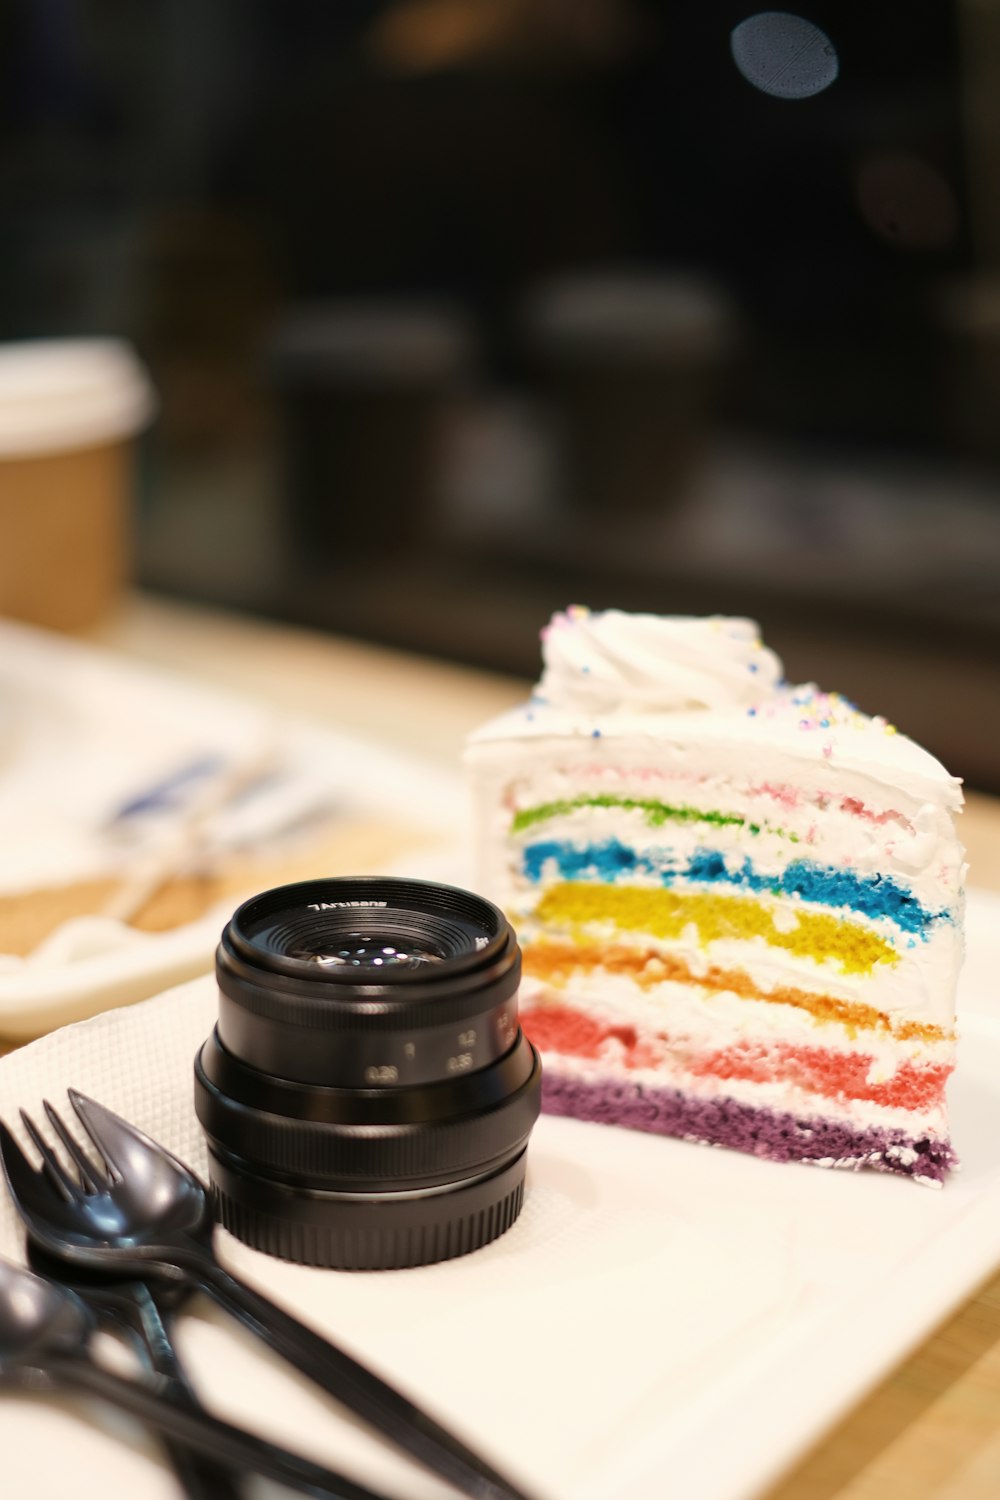 a piece of cake and a camera on a table